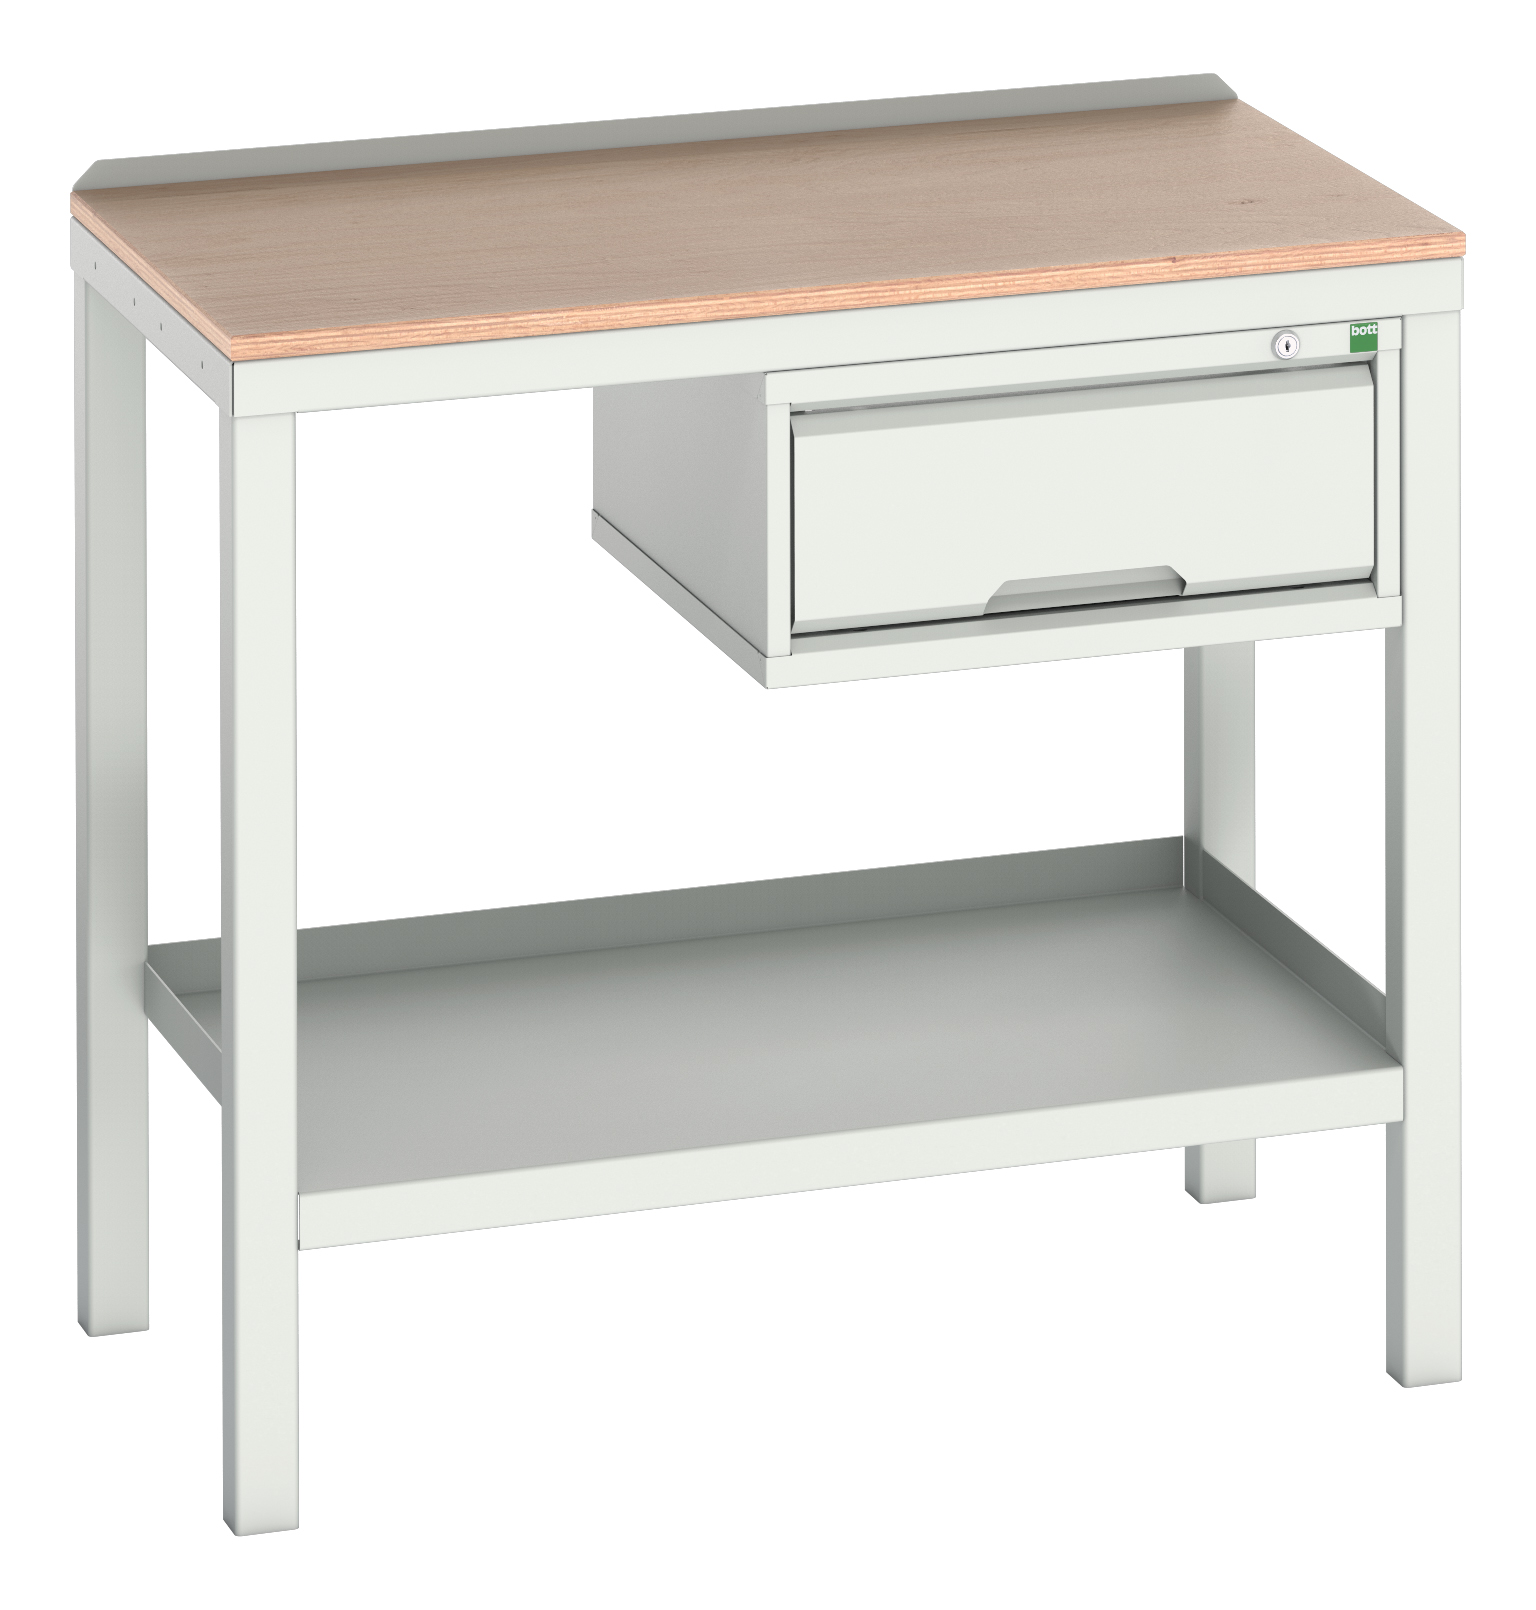 Bott Verso Welded Bench With 1 Drawer Cabinet - 16922601.16